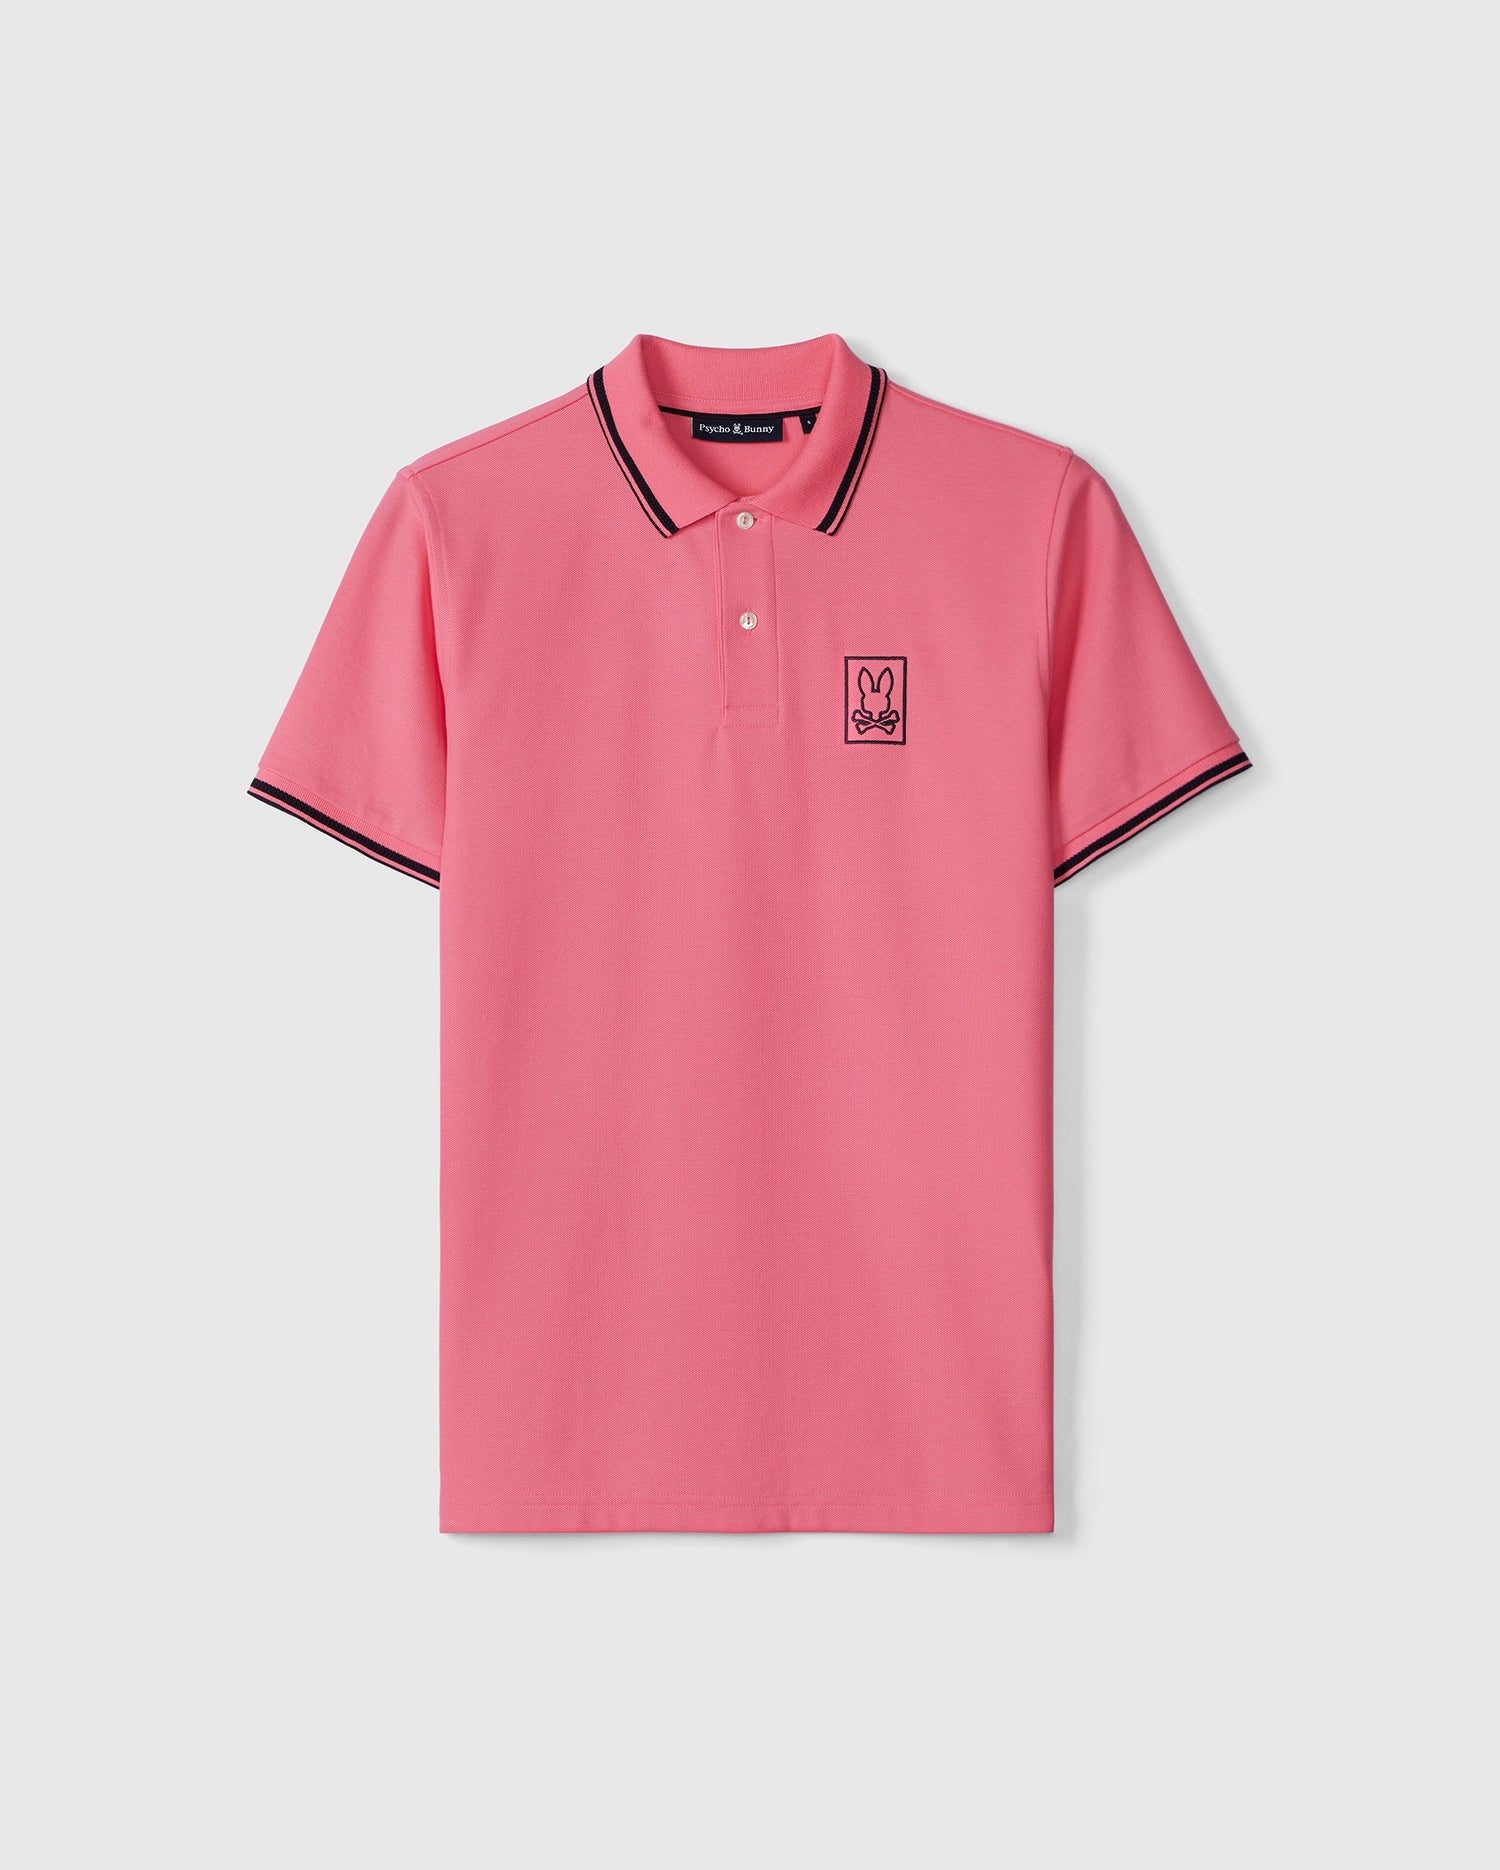 A pink Psycho Bunny polo shirt with black and white striped detailing on the collar and sleeves, featuring a small embroidered rabbit logo on the left chest. The shirt is displayed on a plain background.